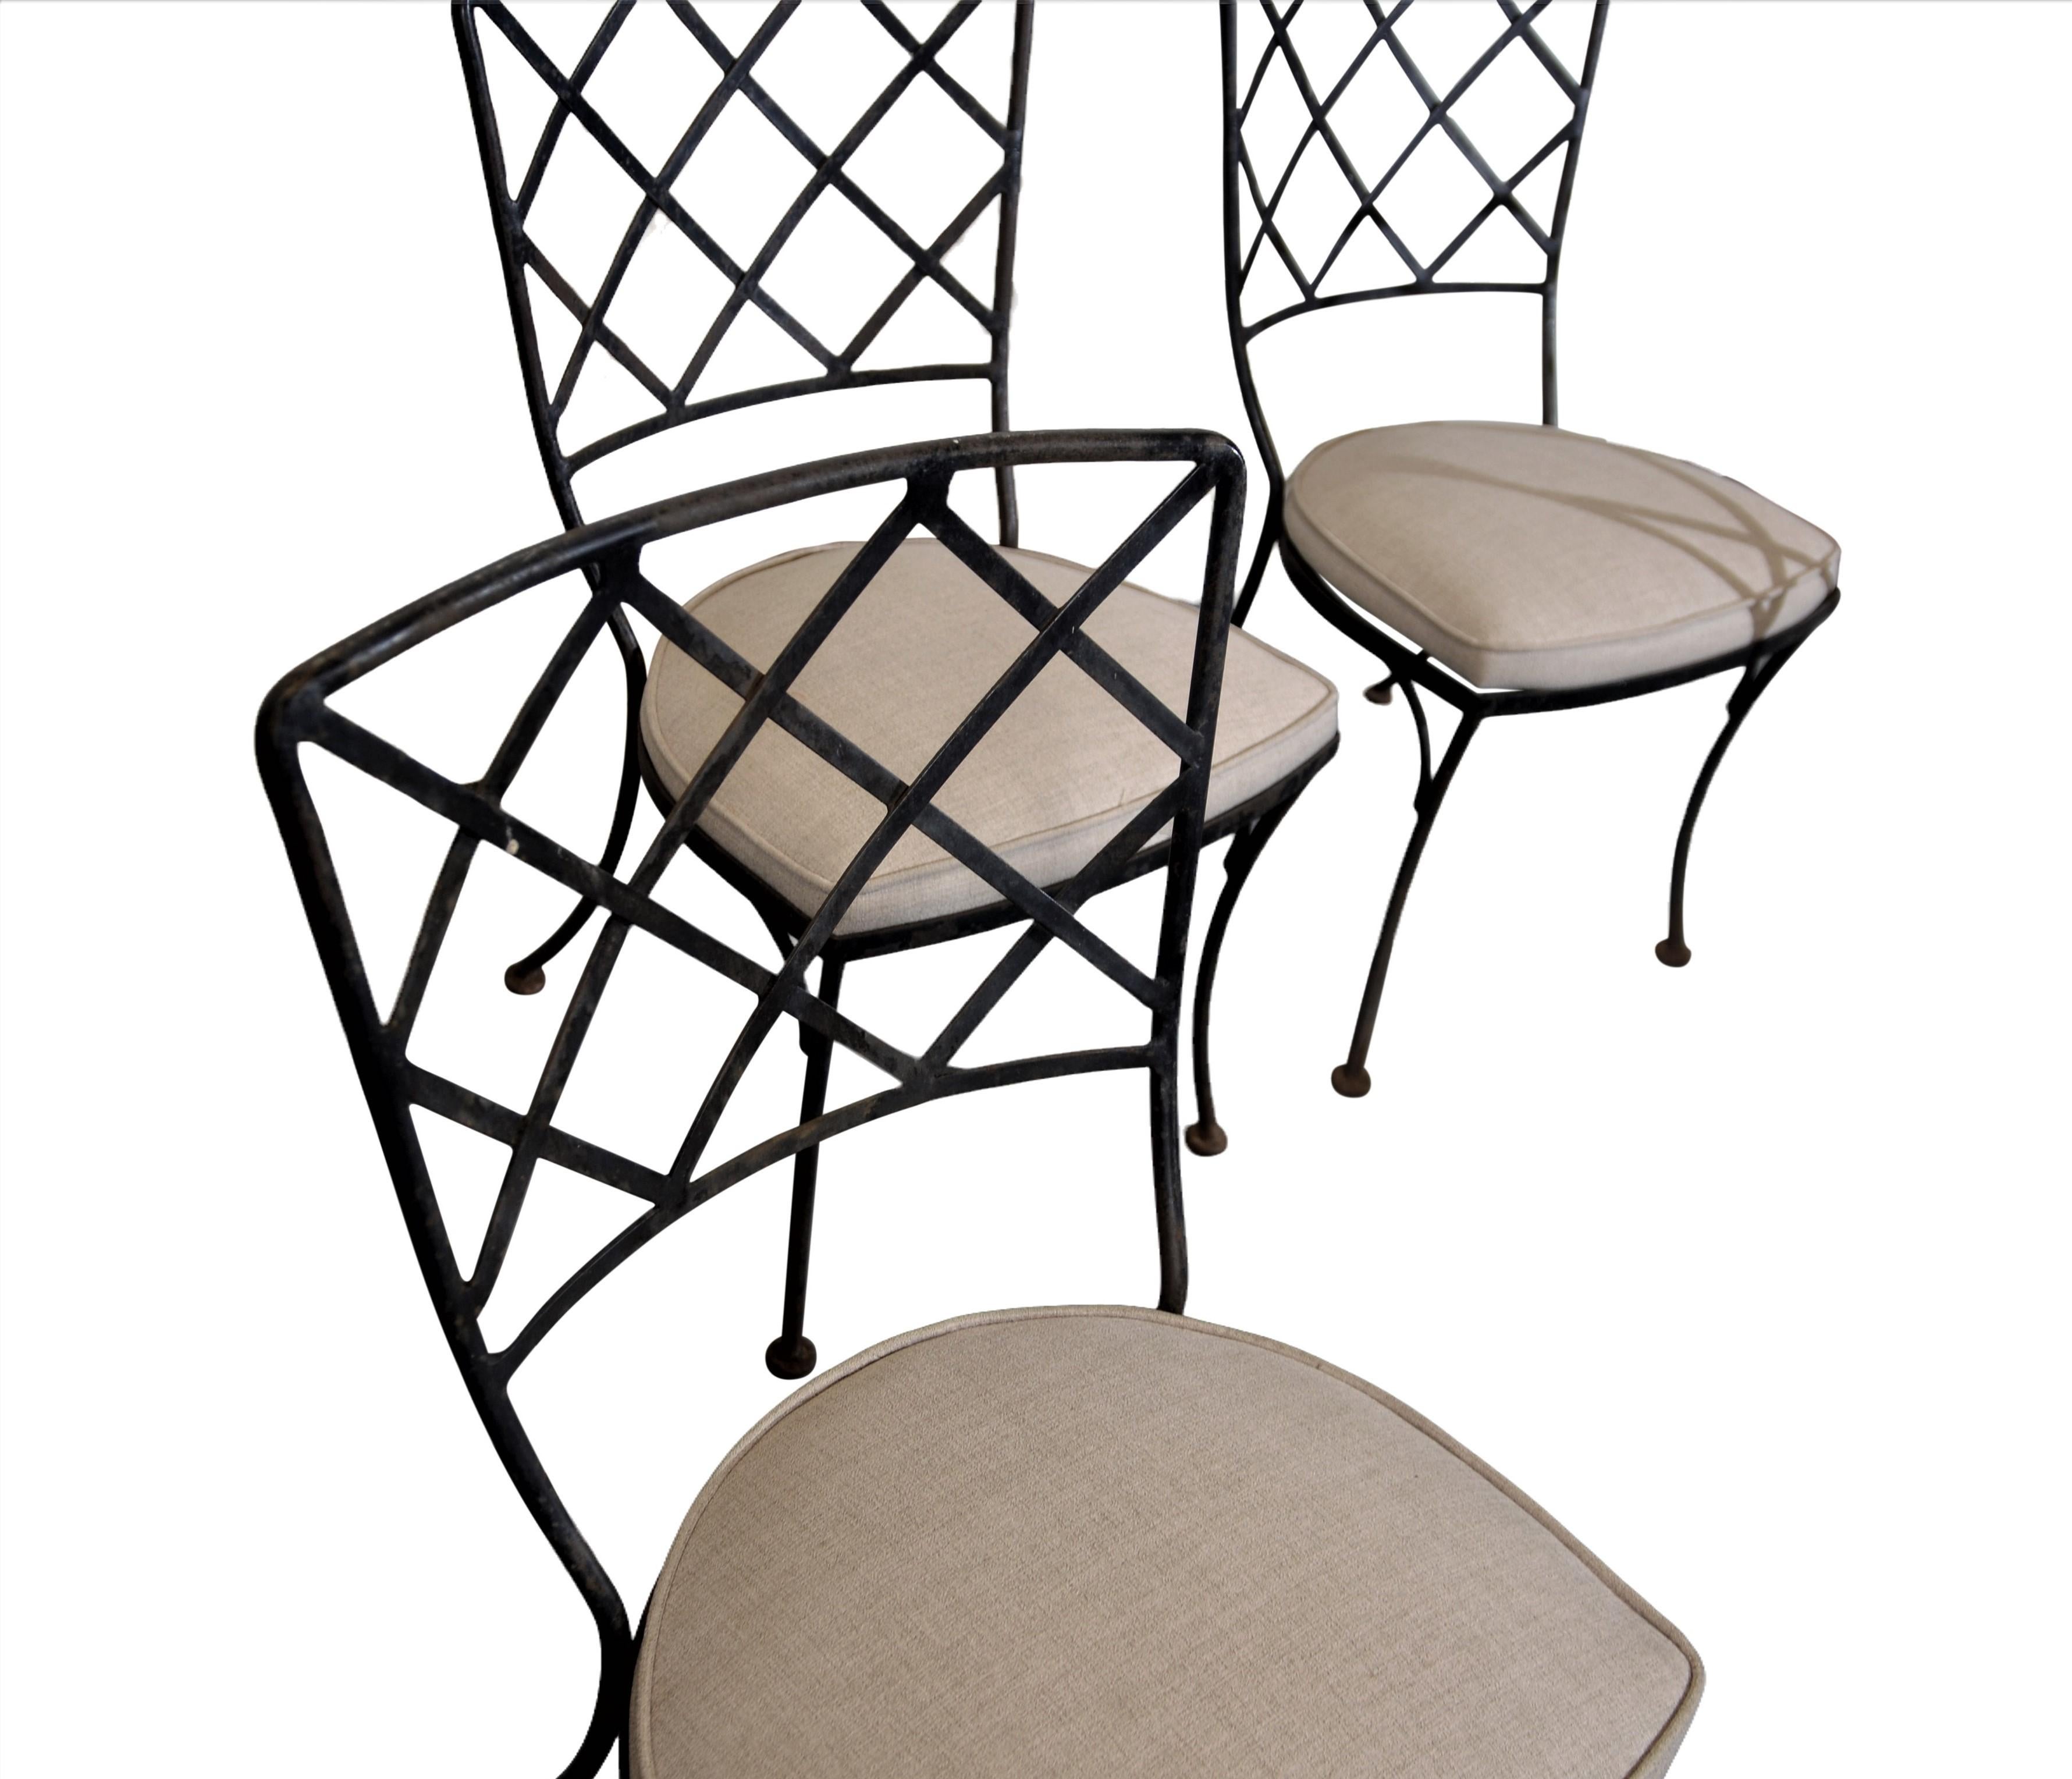 1970's iron patio chairs. The seats are recovered in a fabric that can be used outdoors and indoors.